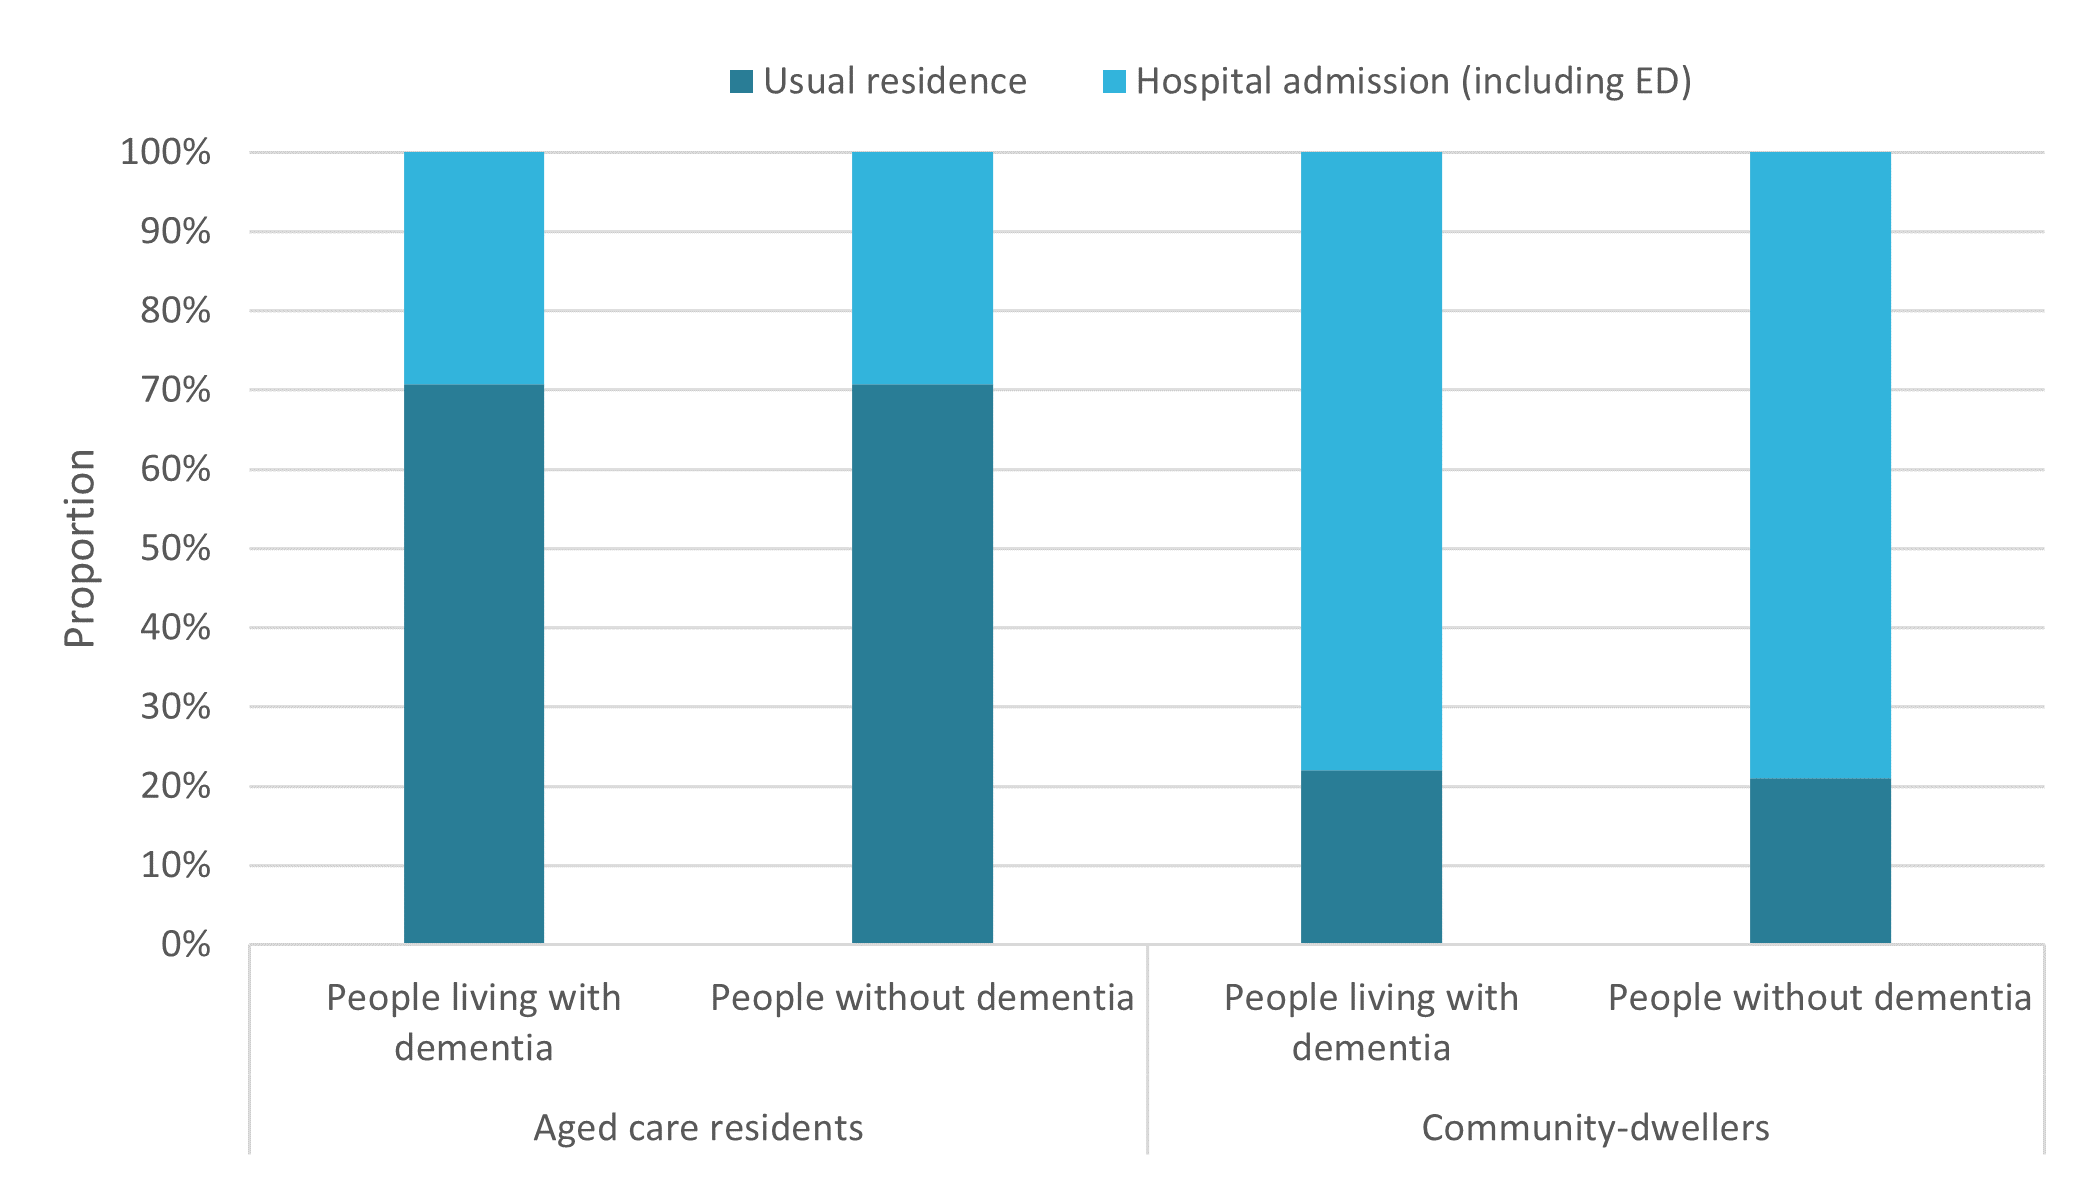 The figure is a bar chart and shows that most aged care residents died in aged care (73%), most community-dwellers died in hospital or the emergency department (79%) and this was very similar for people living with dementia and people without dementia.